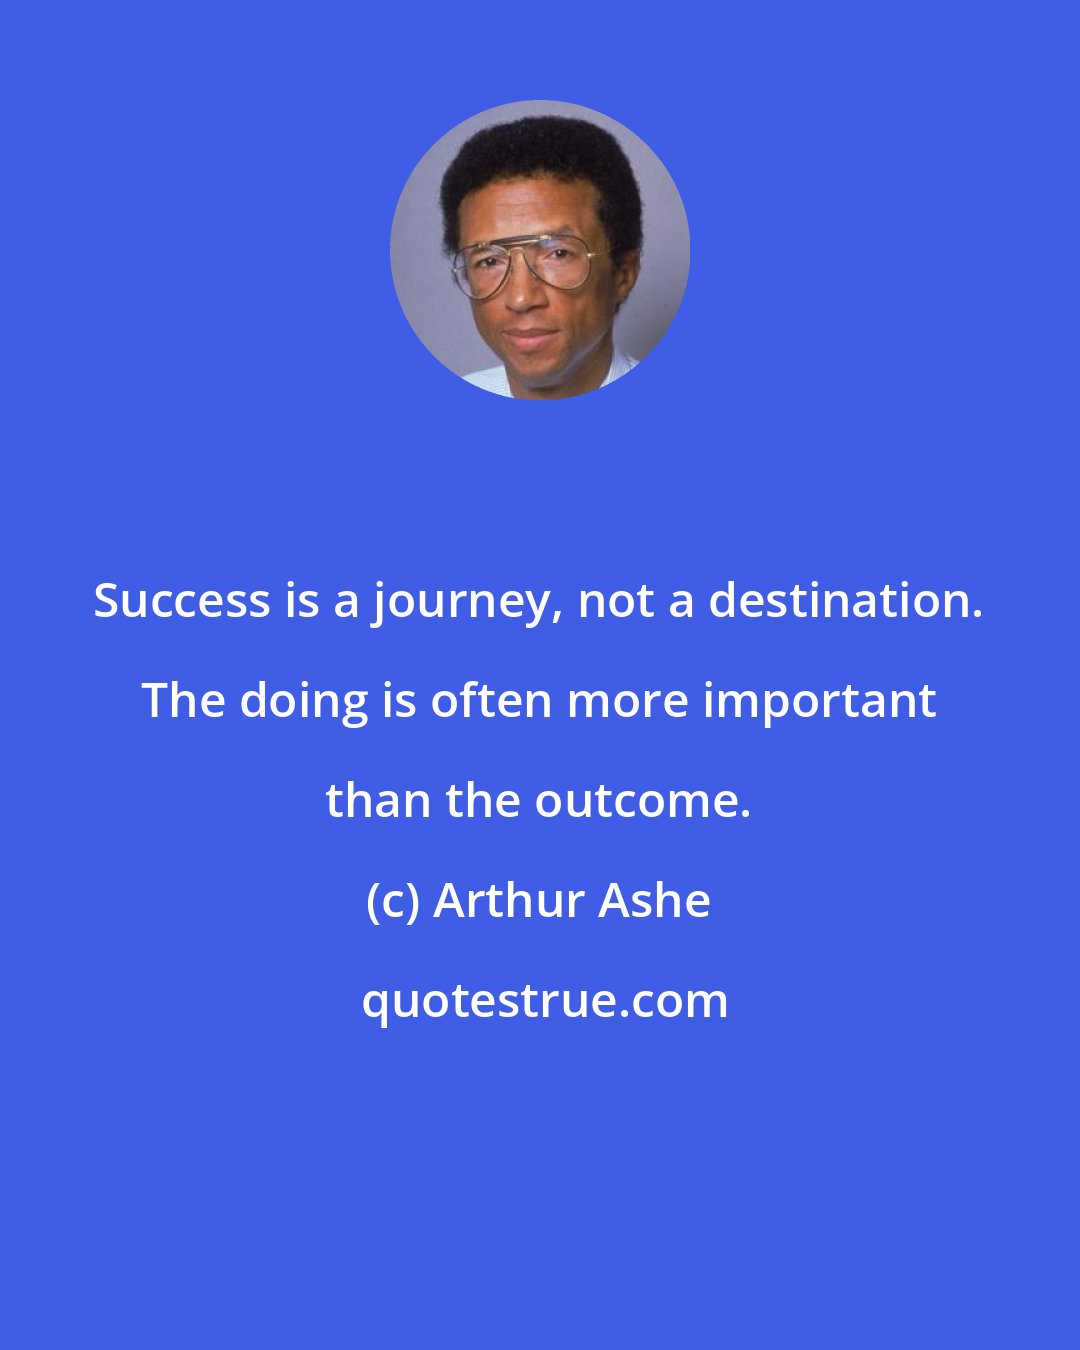 Arthur Ashe: Success is a journey, not a destination. The doing is often more important than the outcome.